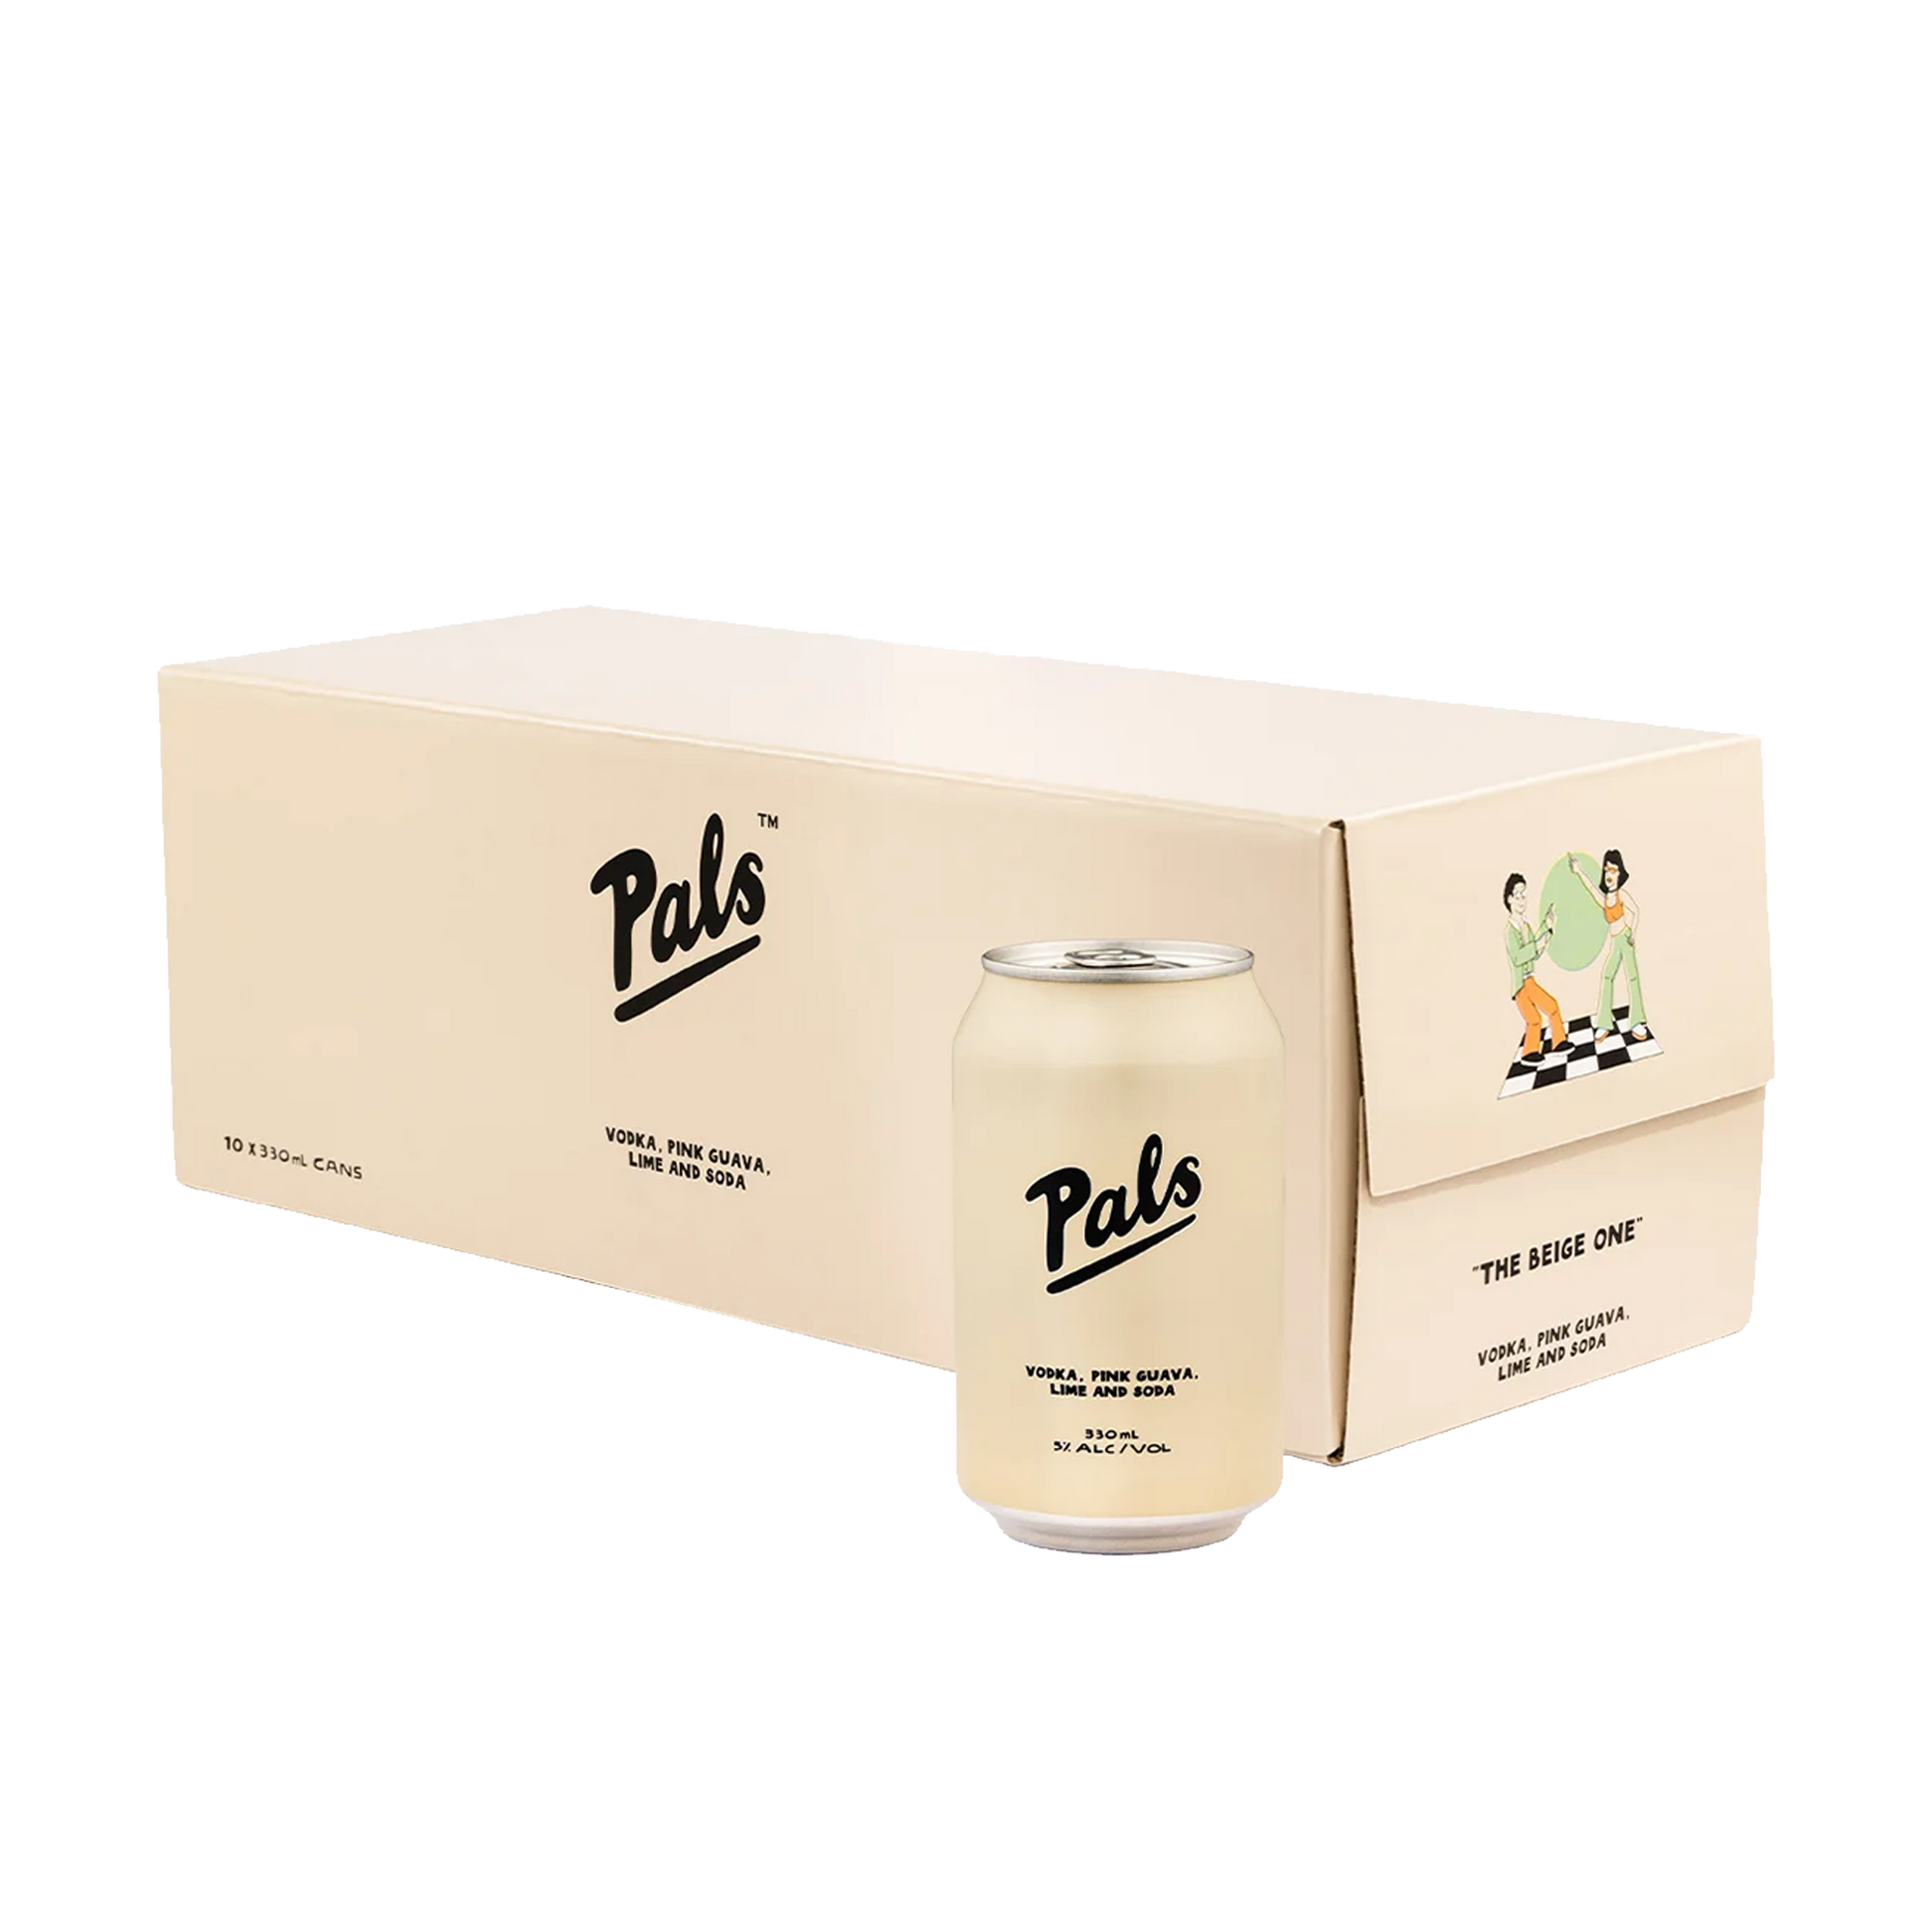 PALS 10 Pack - Vodka, Pink Guava, Lime and Soda